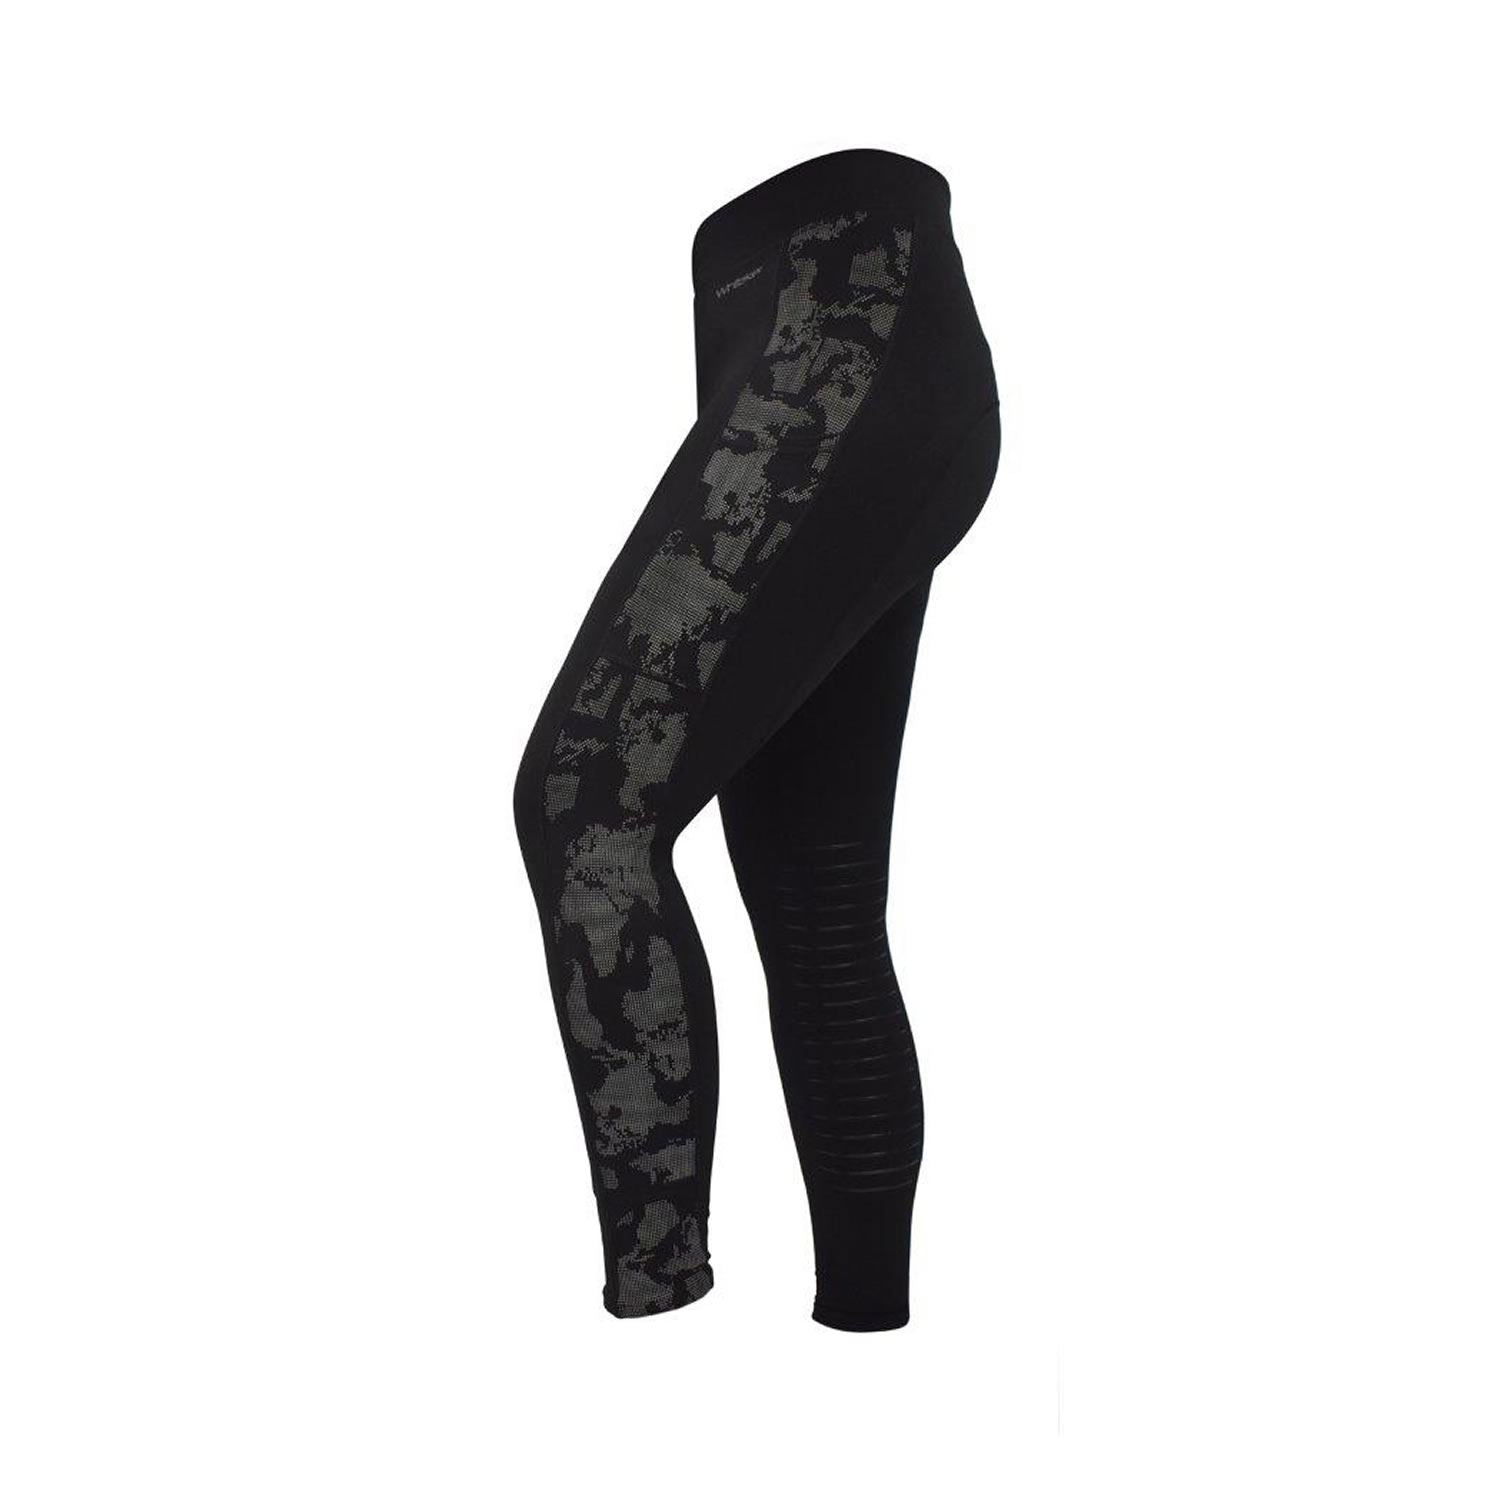 Whitaker Riding Tights Sydney Reflect - Just Horse Riders